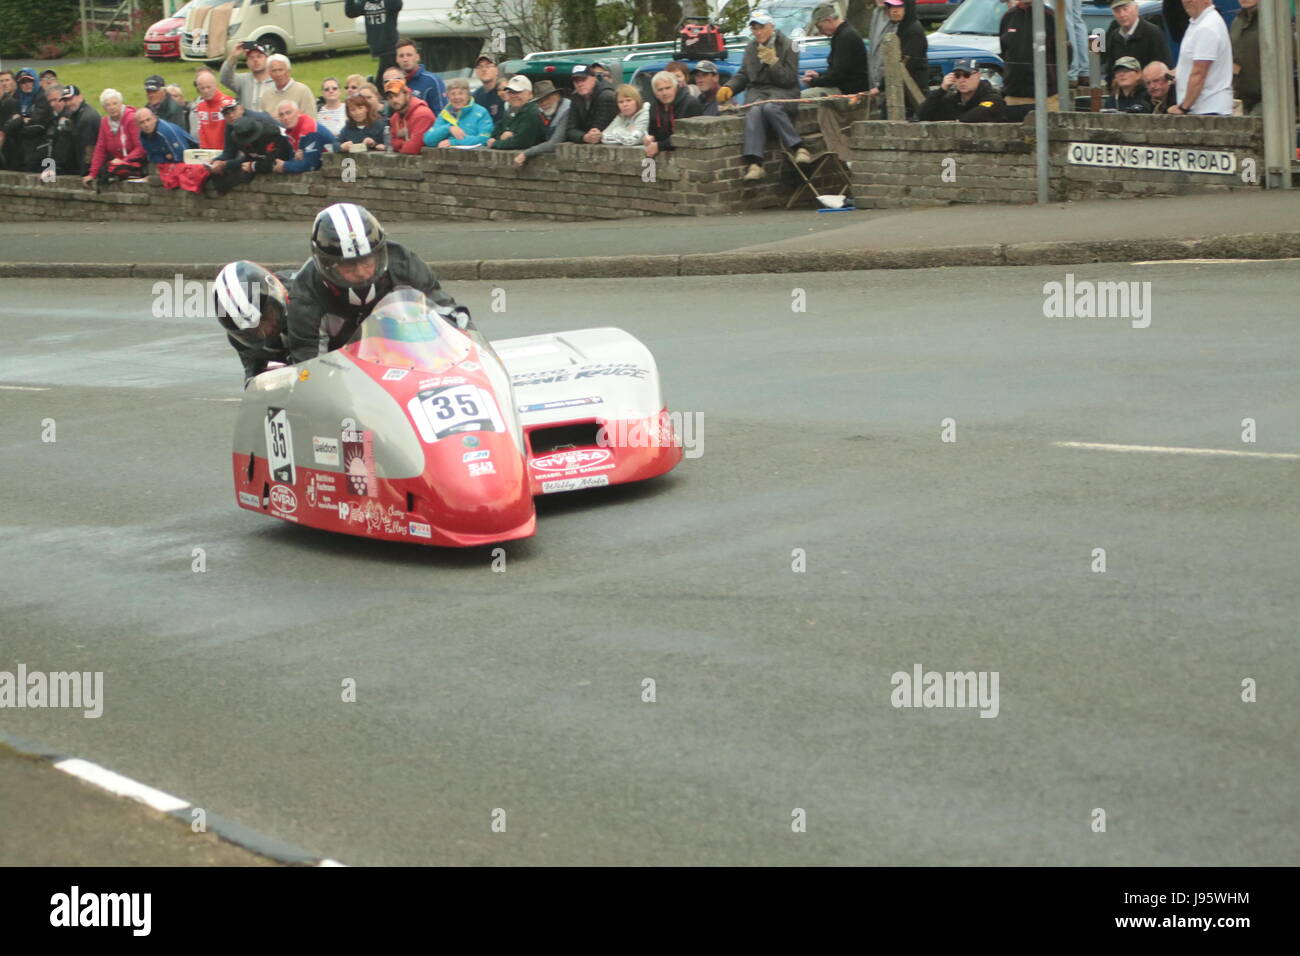 Ramsey, UK. 5th Jun, 2017. Isle of Man TT Races, Sure Sidecar Race. Number 35, Francois Leblond and Bruno Picquoin on their 600cc Shelbourne Suzuki of the Racing Side team from Pigeon, France, at Cruickshanks Corner, Ramsey, Isle of Man. Credit: Louisa Jane Bawden/Alamy Live News. Stock Photo